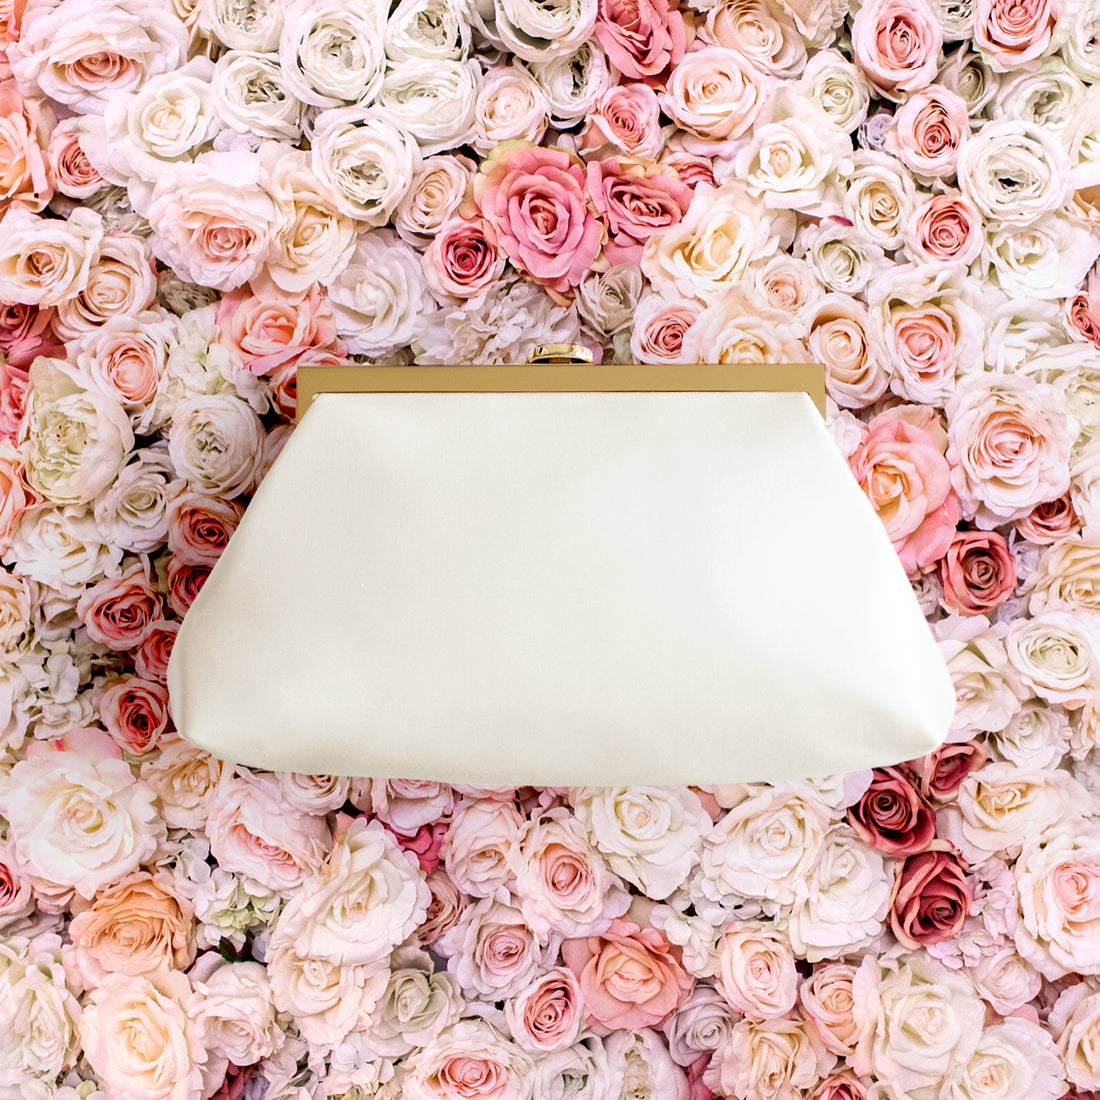 Rosa Clutch in Ivory white satin with gold hardware clasp frame.